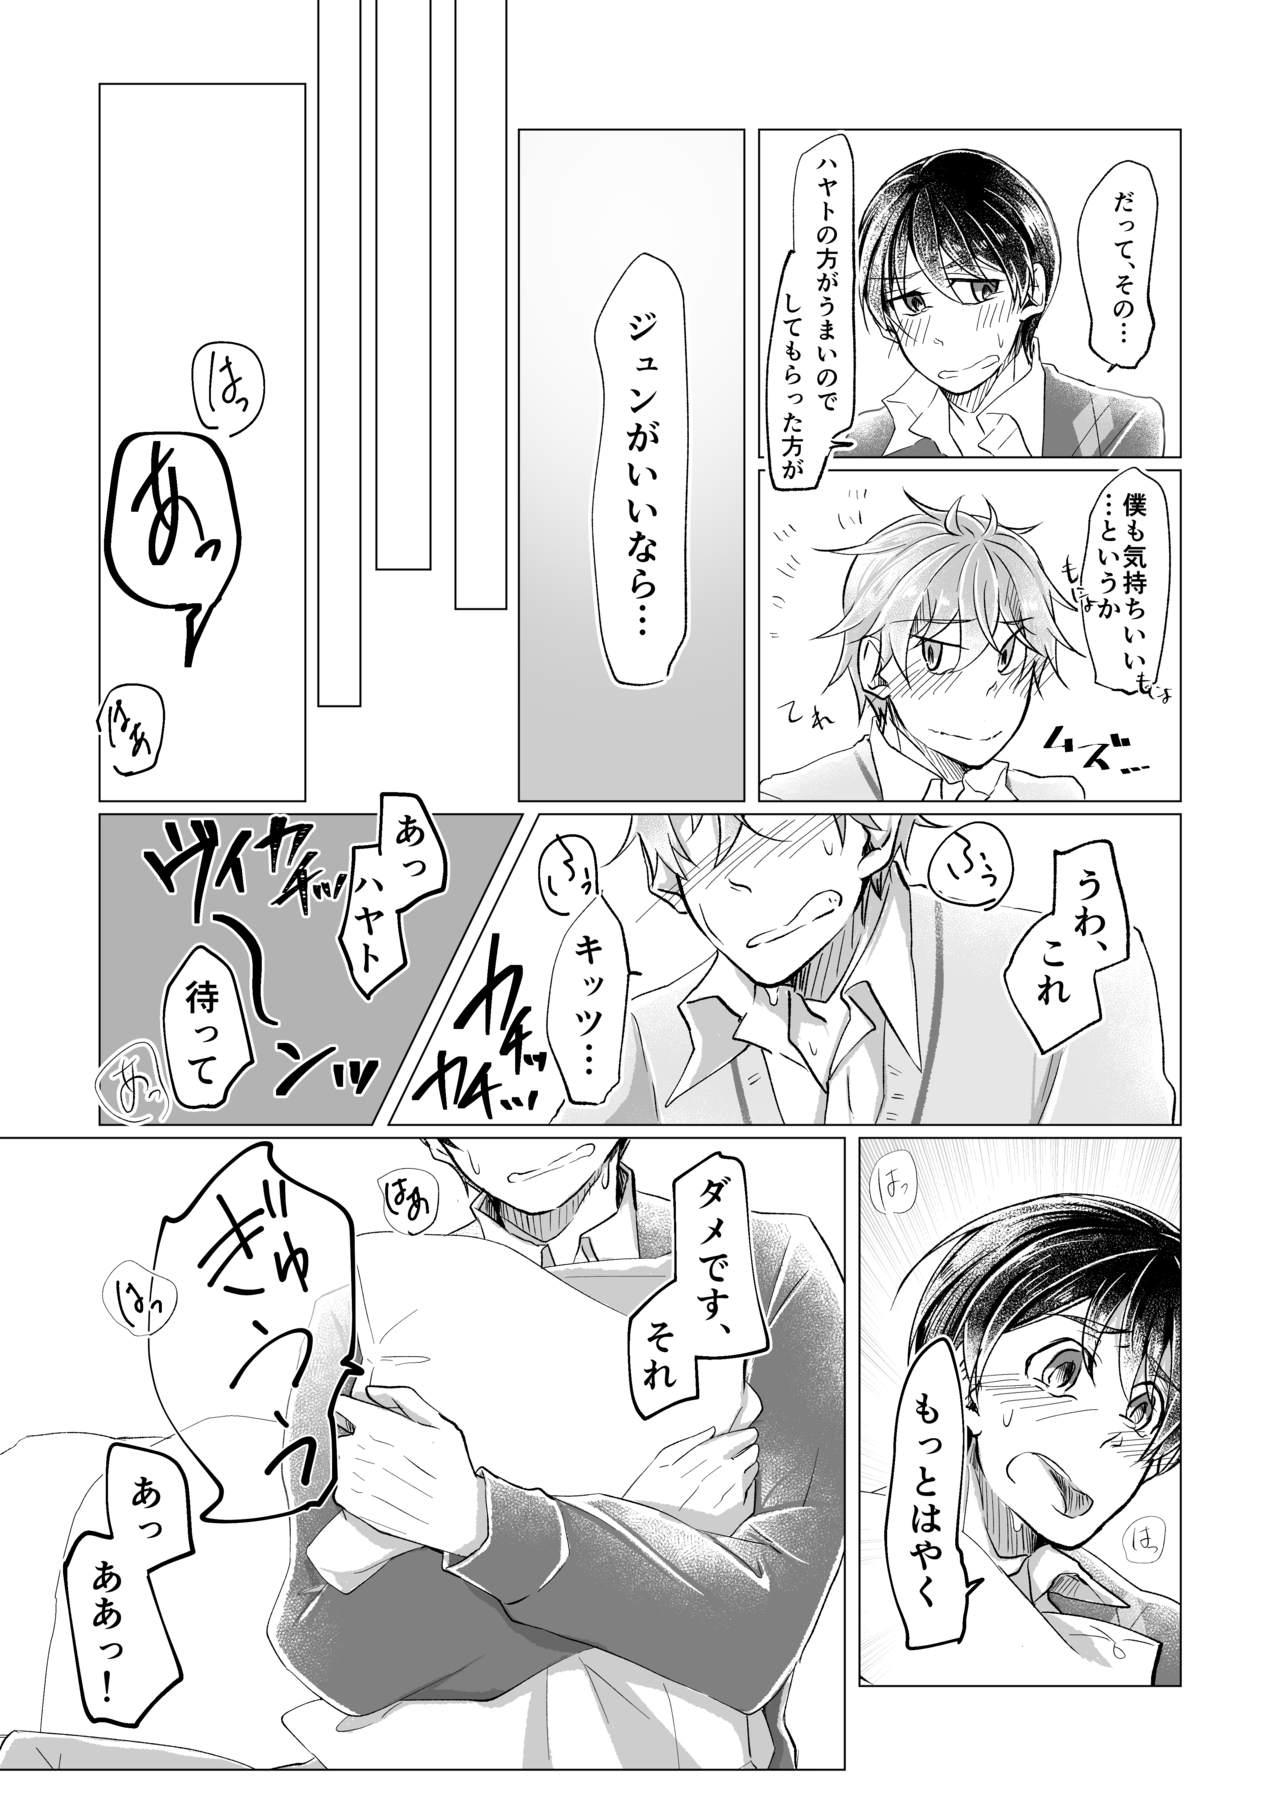 Con 11:23 - The idolmaster sidem Cheat - Page 12